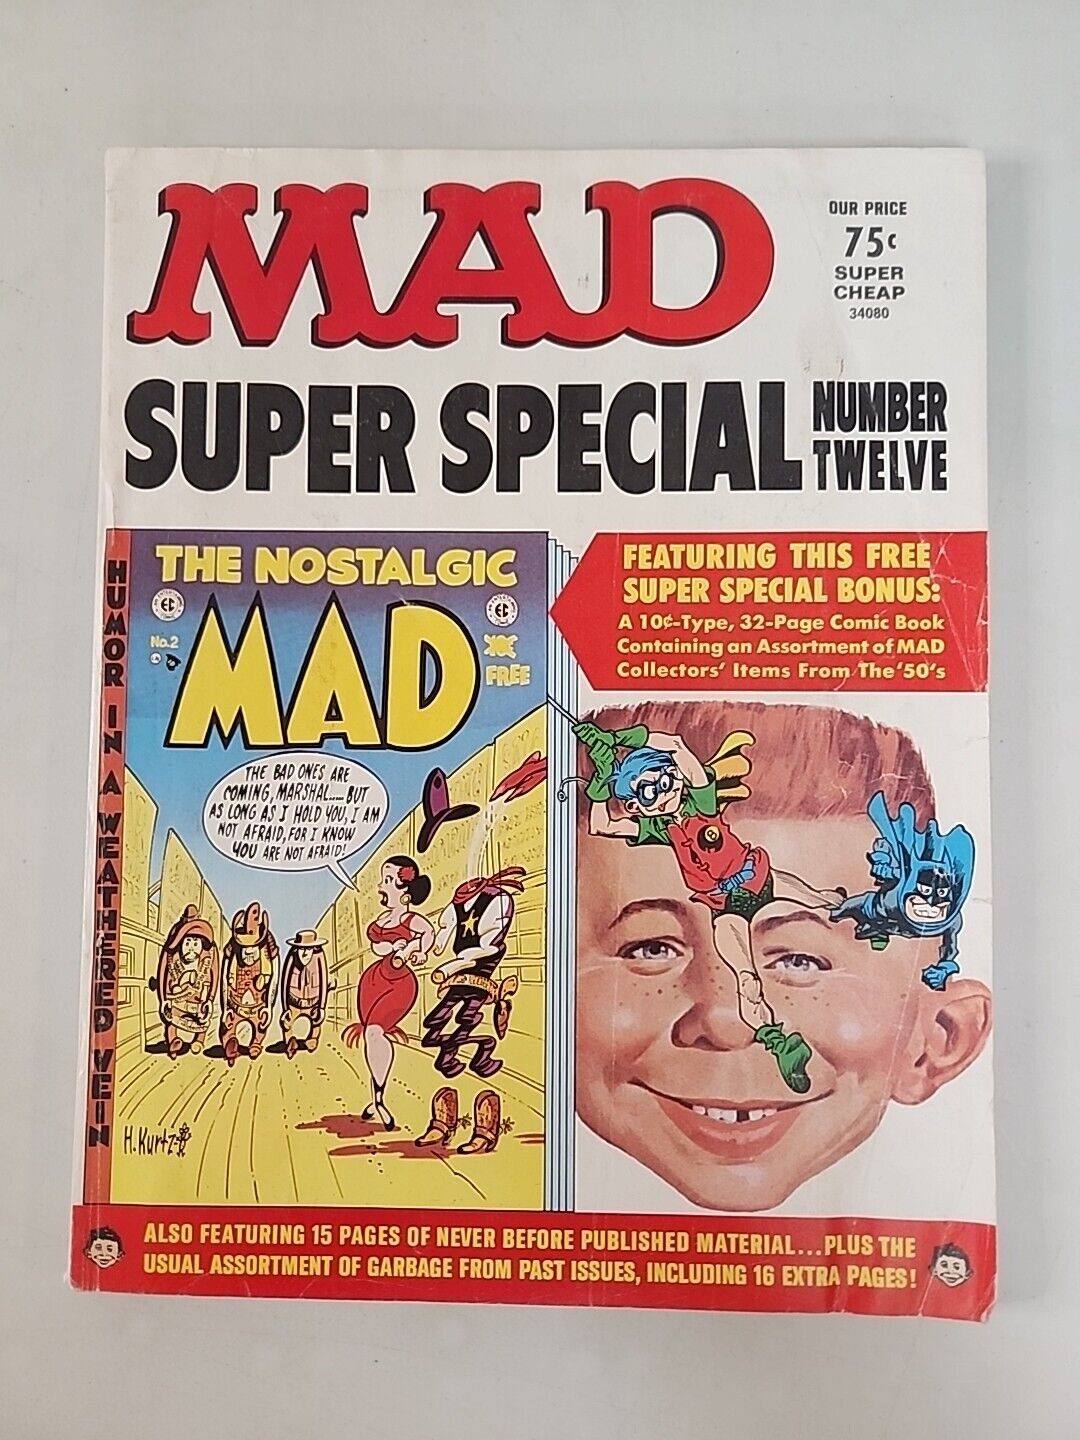 Mad Super Special Number 12 w/Insert